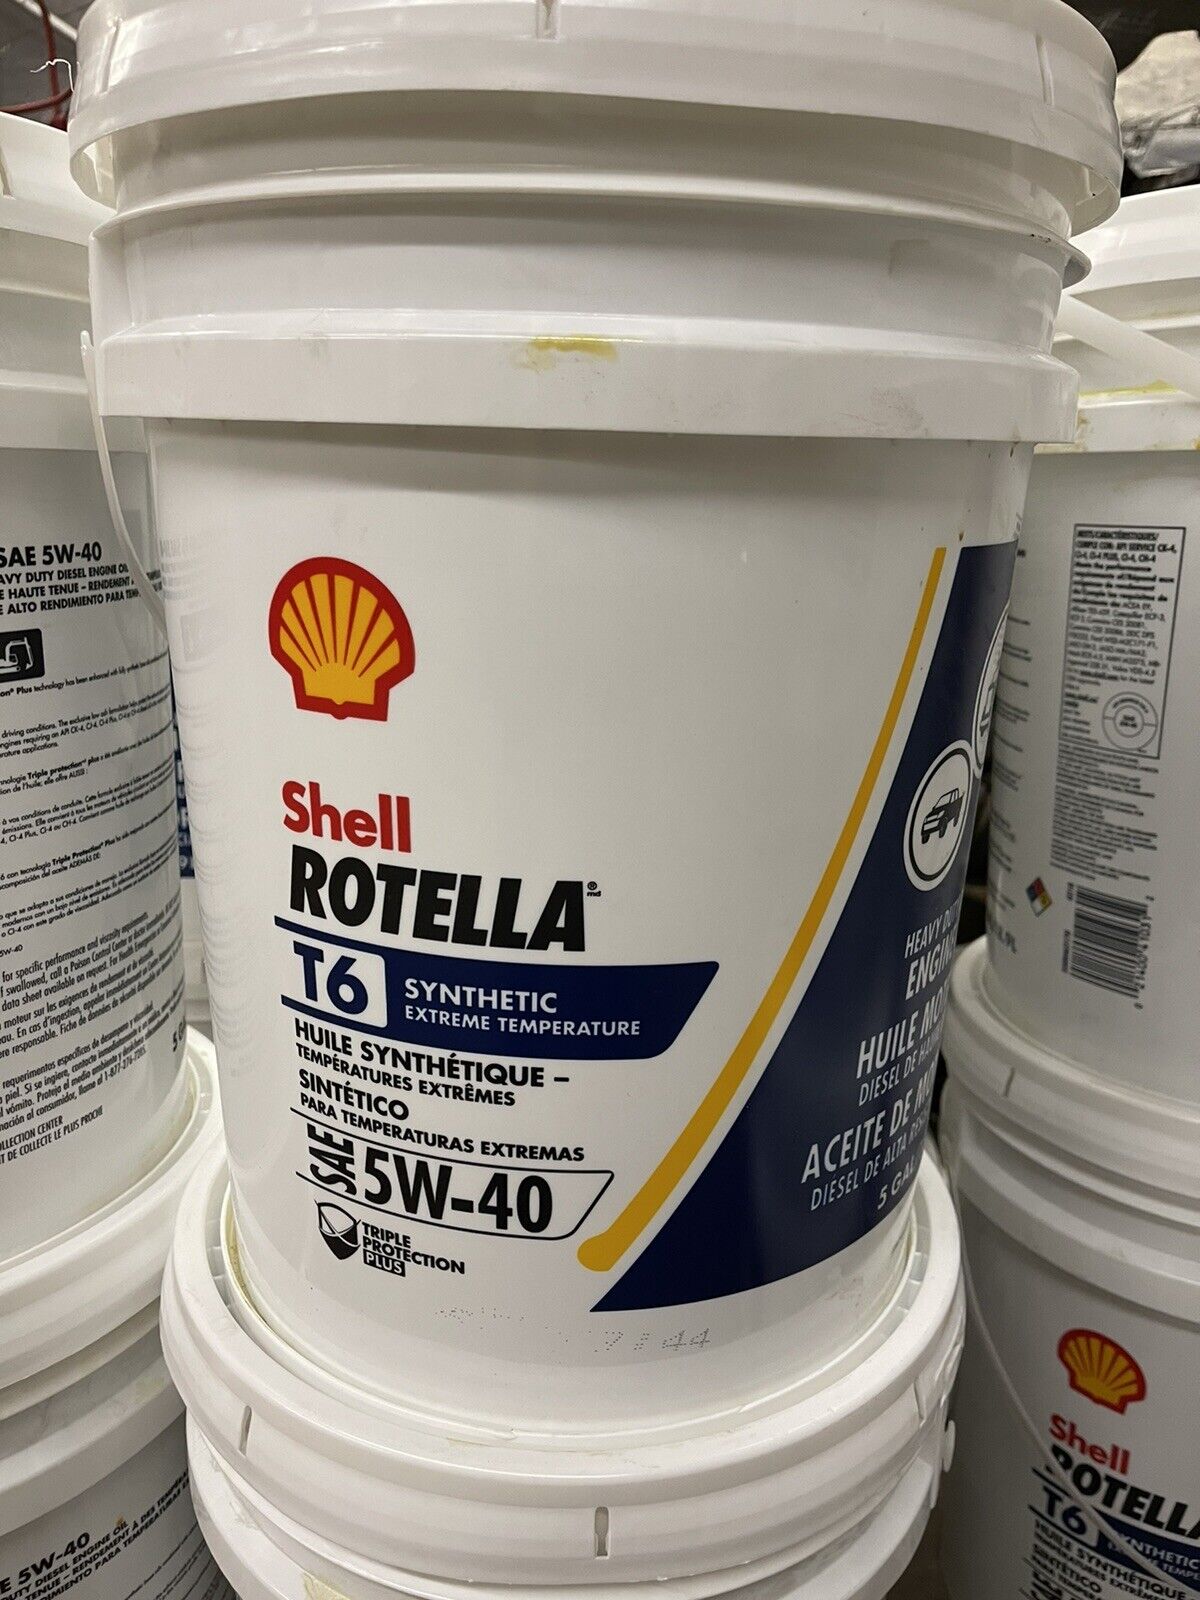 Shell Rotella T6 Full Synthetic 5W-40 Diesel Engine Oil (5 Gallon)